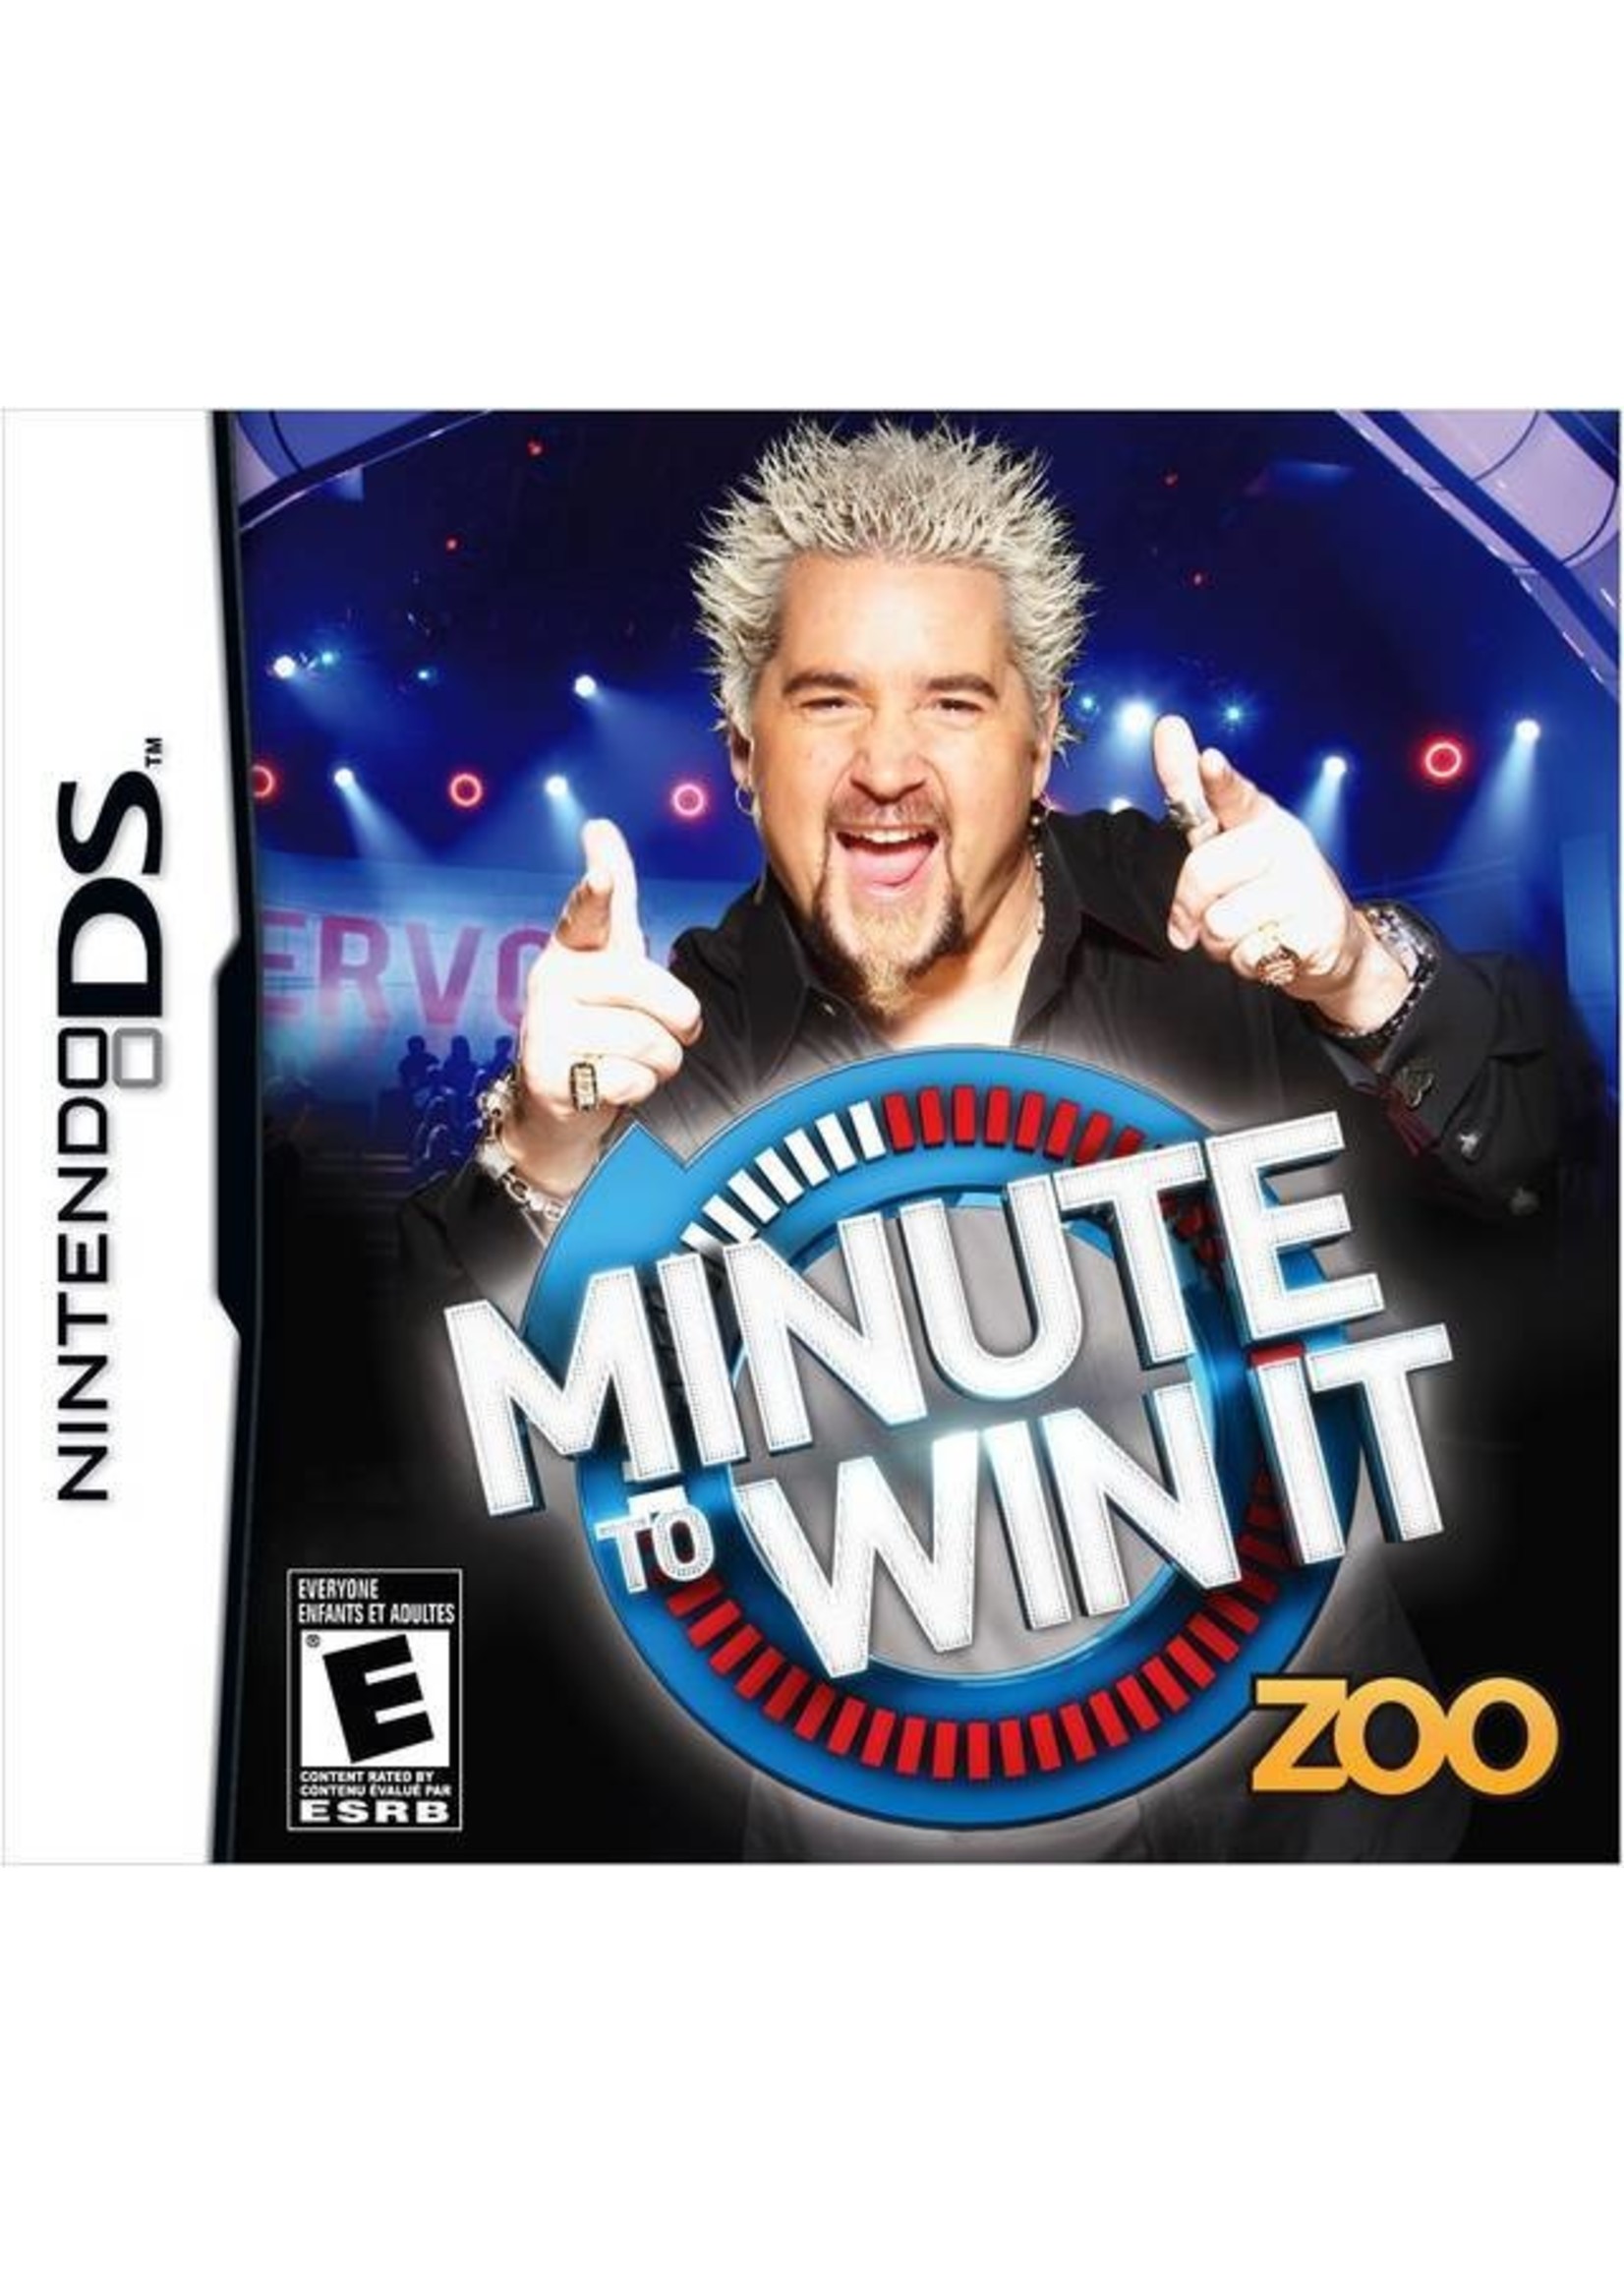 Nintendo DS Minute to Win It - Cart Only